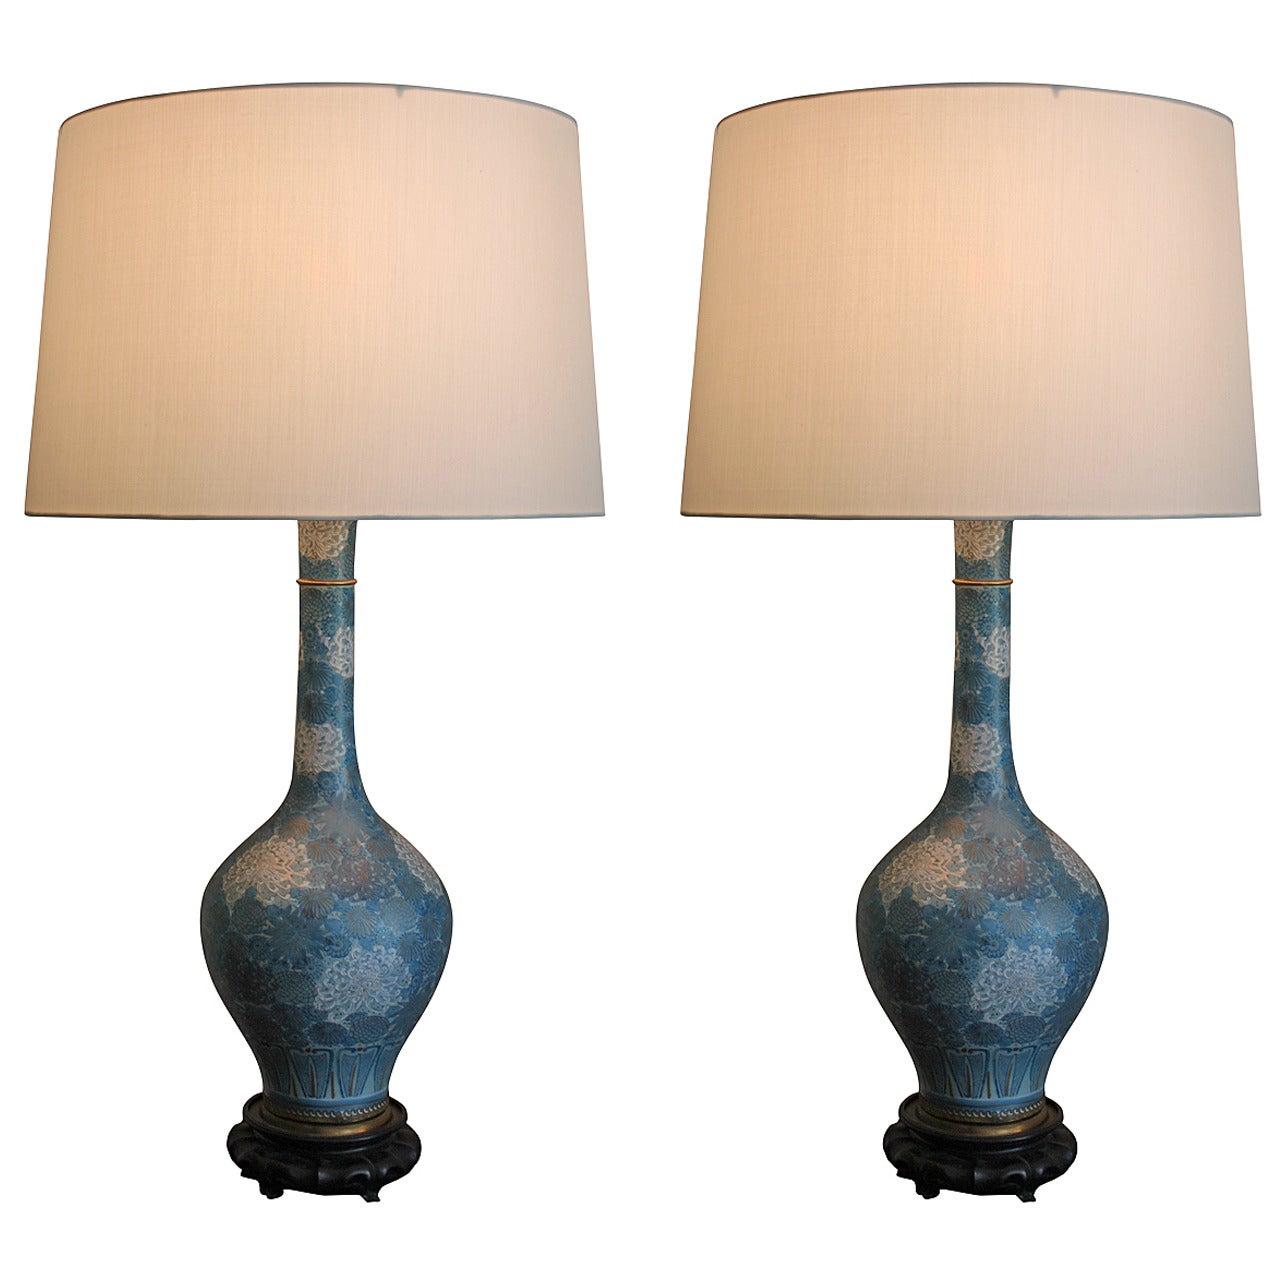 Pair of Chinese Blue and White Porcelain Chrysanthemum Lamps